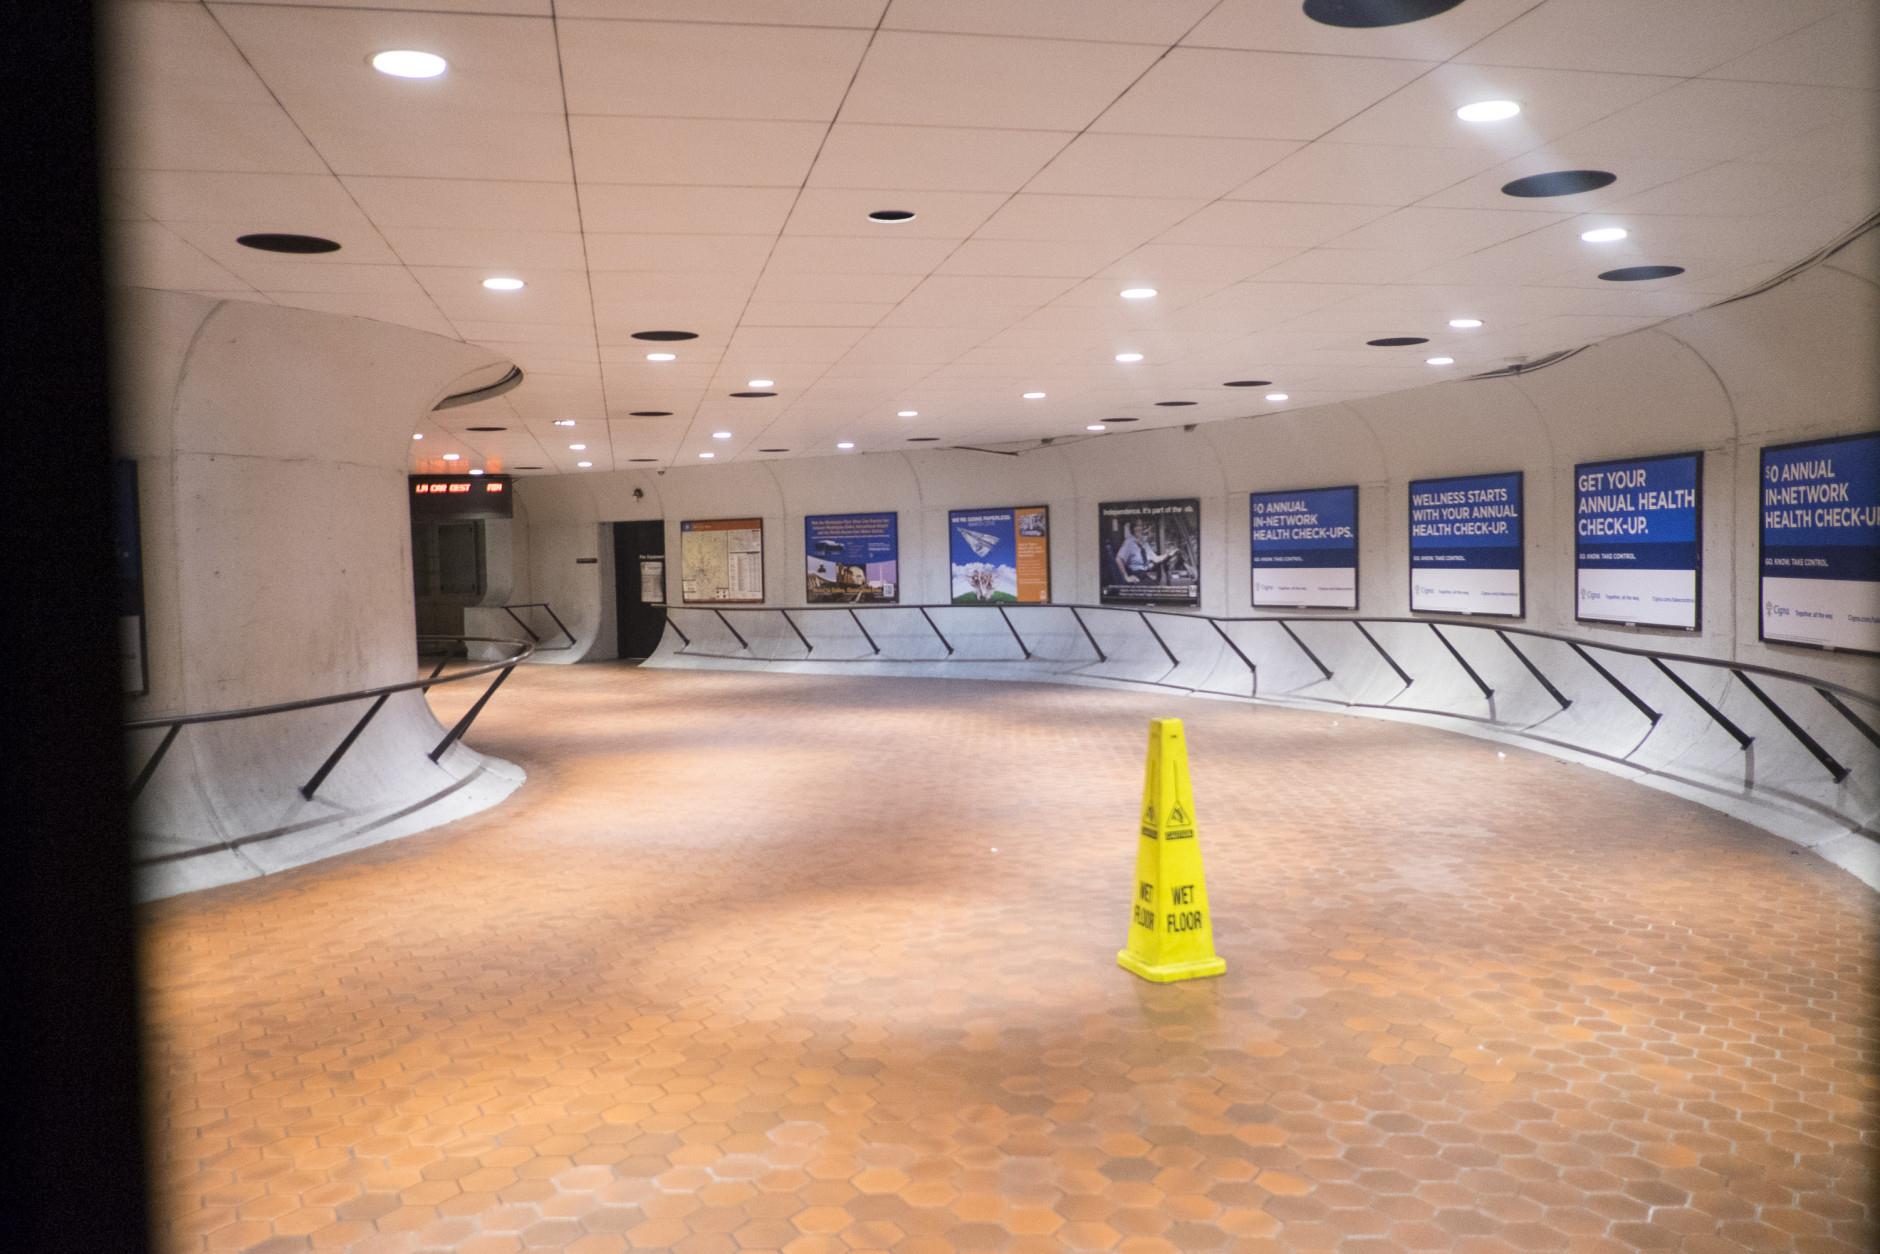 WASHINGTON, DC - March 16: The entrance to the Metro Center station is gated closed during the morning rush hours on March 16, 2016 in Washington, DC. Metro's General manager Paul Wiedefeld made the decision to close for 29 hours for a safety inspection after a recent fire. Metro makes approximately 725,000 trips per day in the D.C. Metro area. (Photo by Pete Marovich/Getty Images)